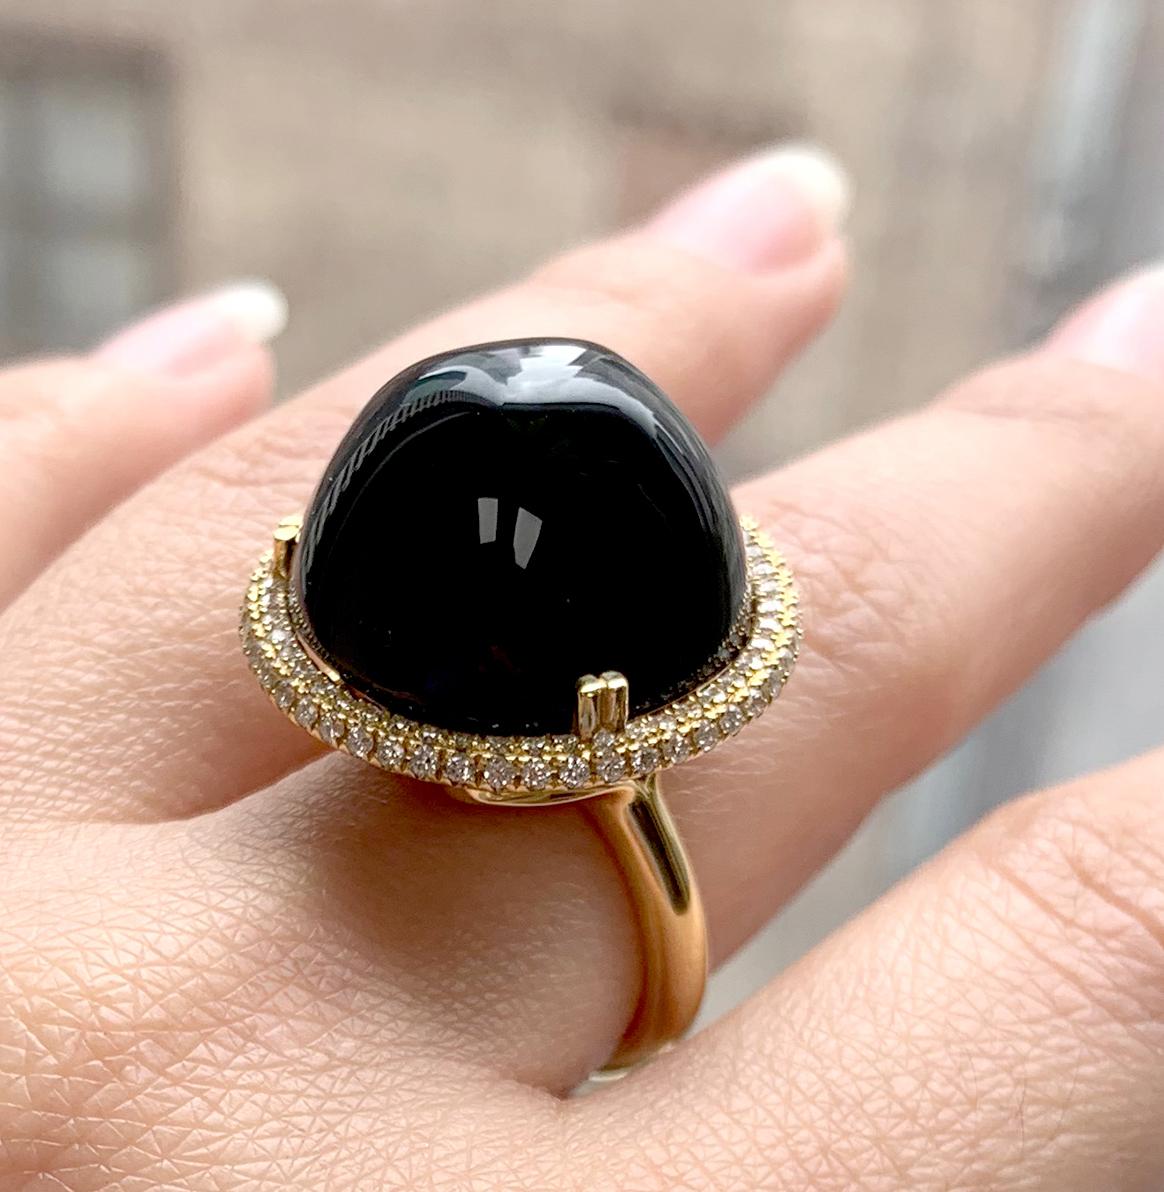 Onyx Bubble Gum Ring in 18K Yellow Gold with Diamonds, from 'Rock 'N Roll' Collection. Please allow 2-4 weeks for this item to be delivered.

Stone Size: 19 mm 

Diamonds: G-H / VS, Approx Wt : 0.60 Cts
